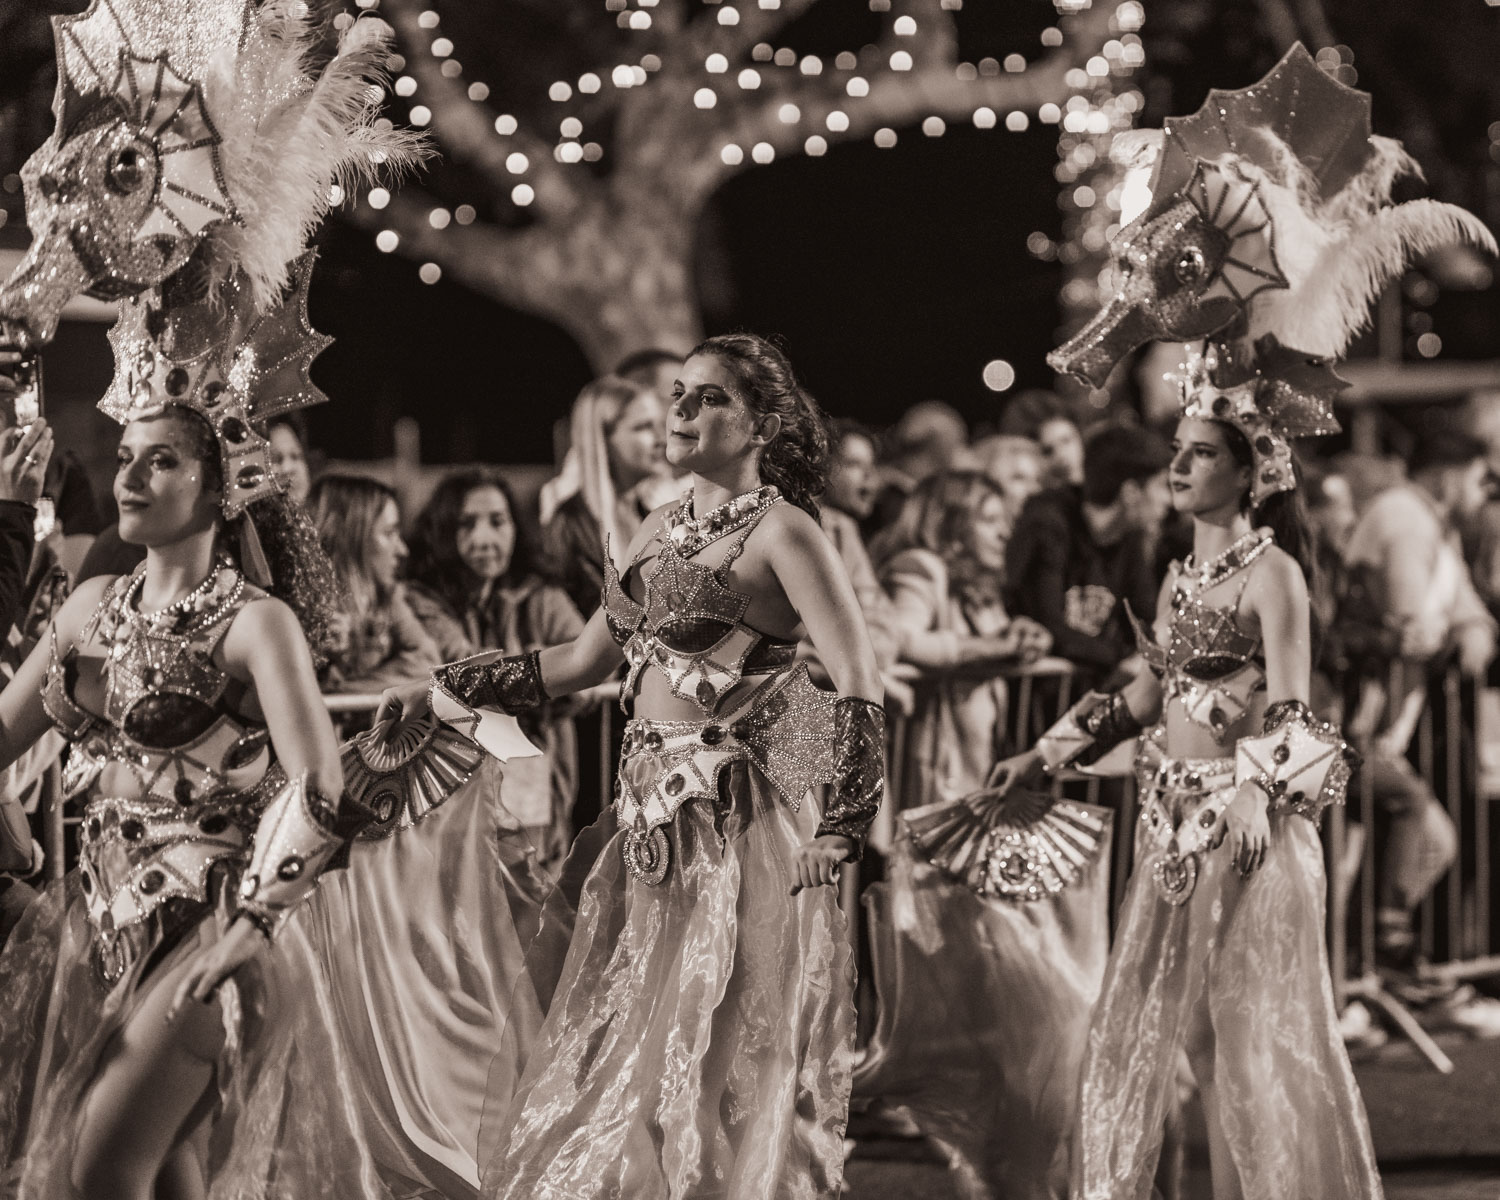 The Carnival of Life - Carnival Parade in Madeira.